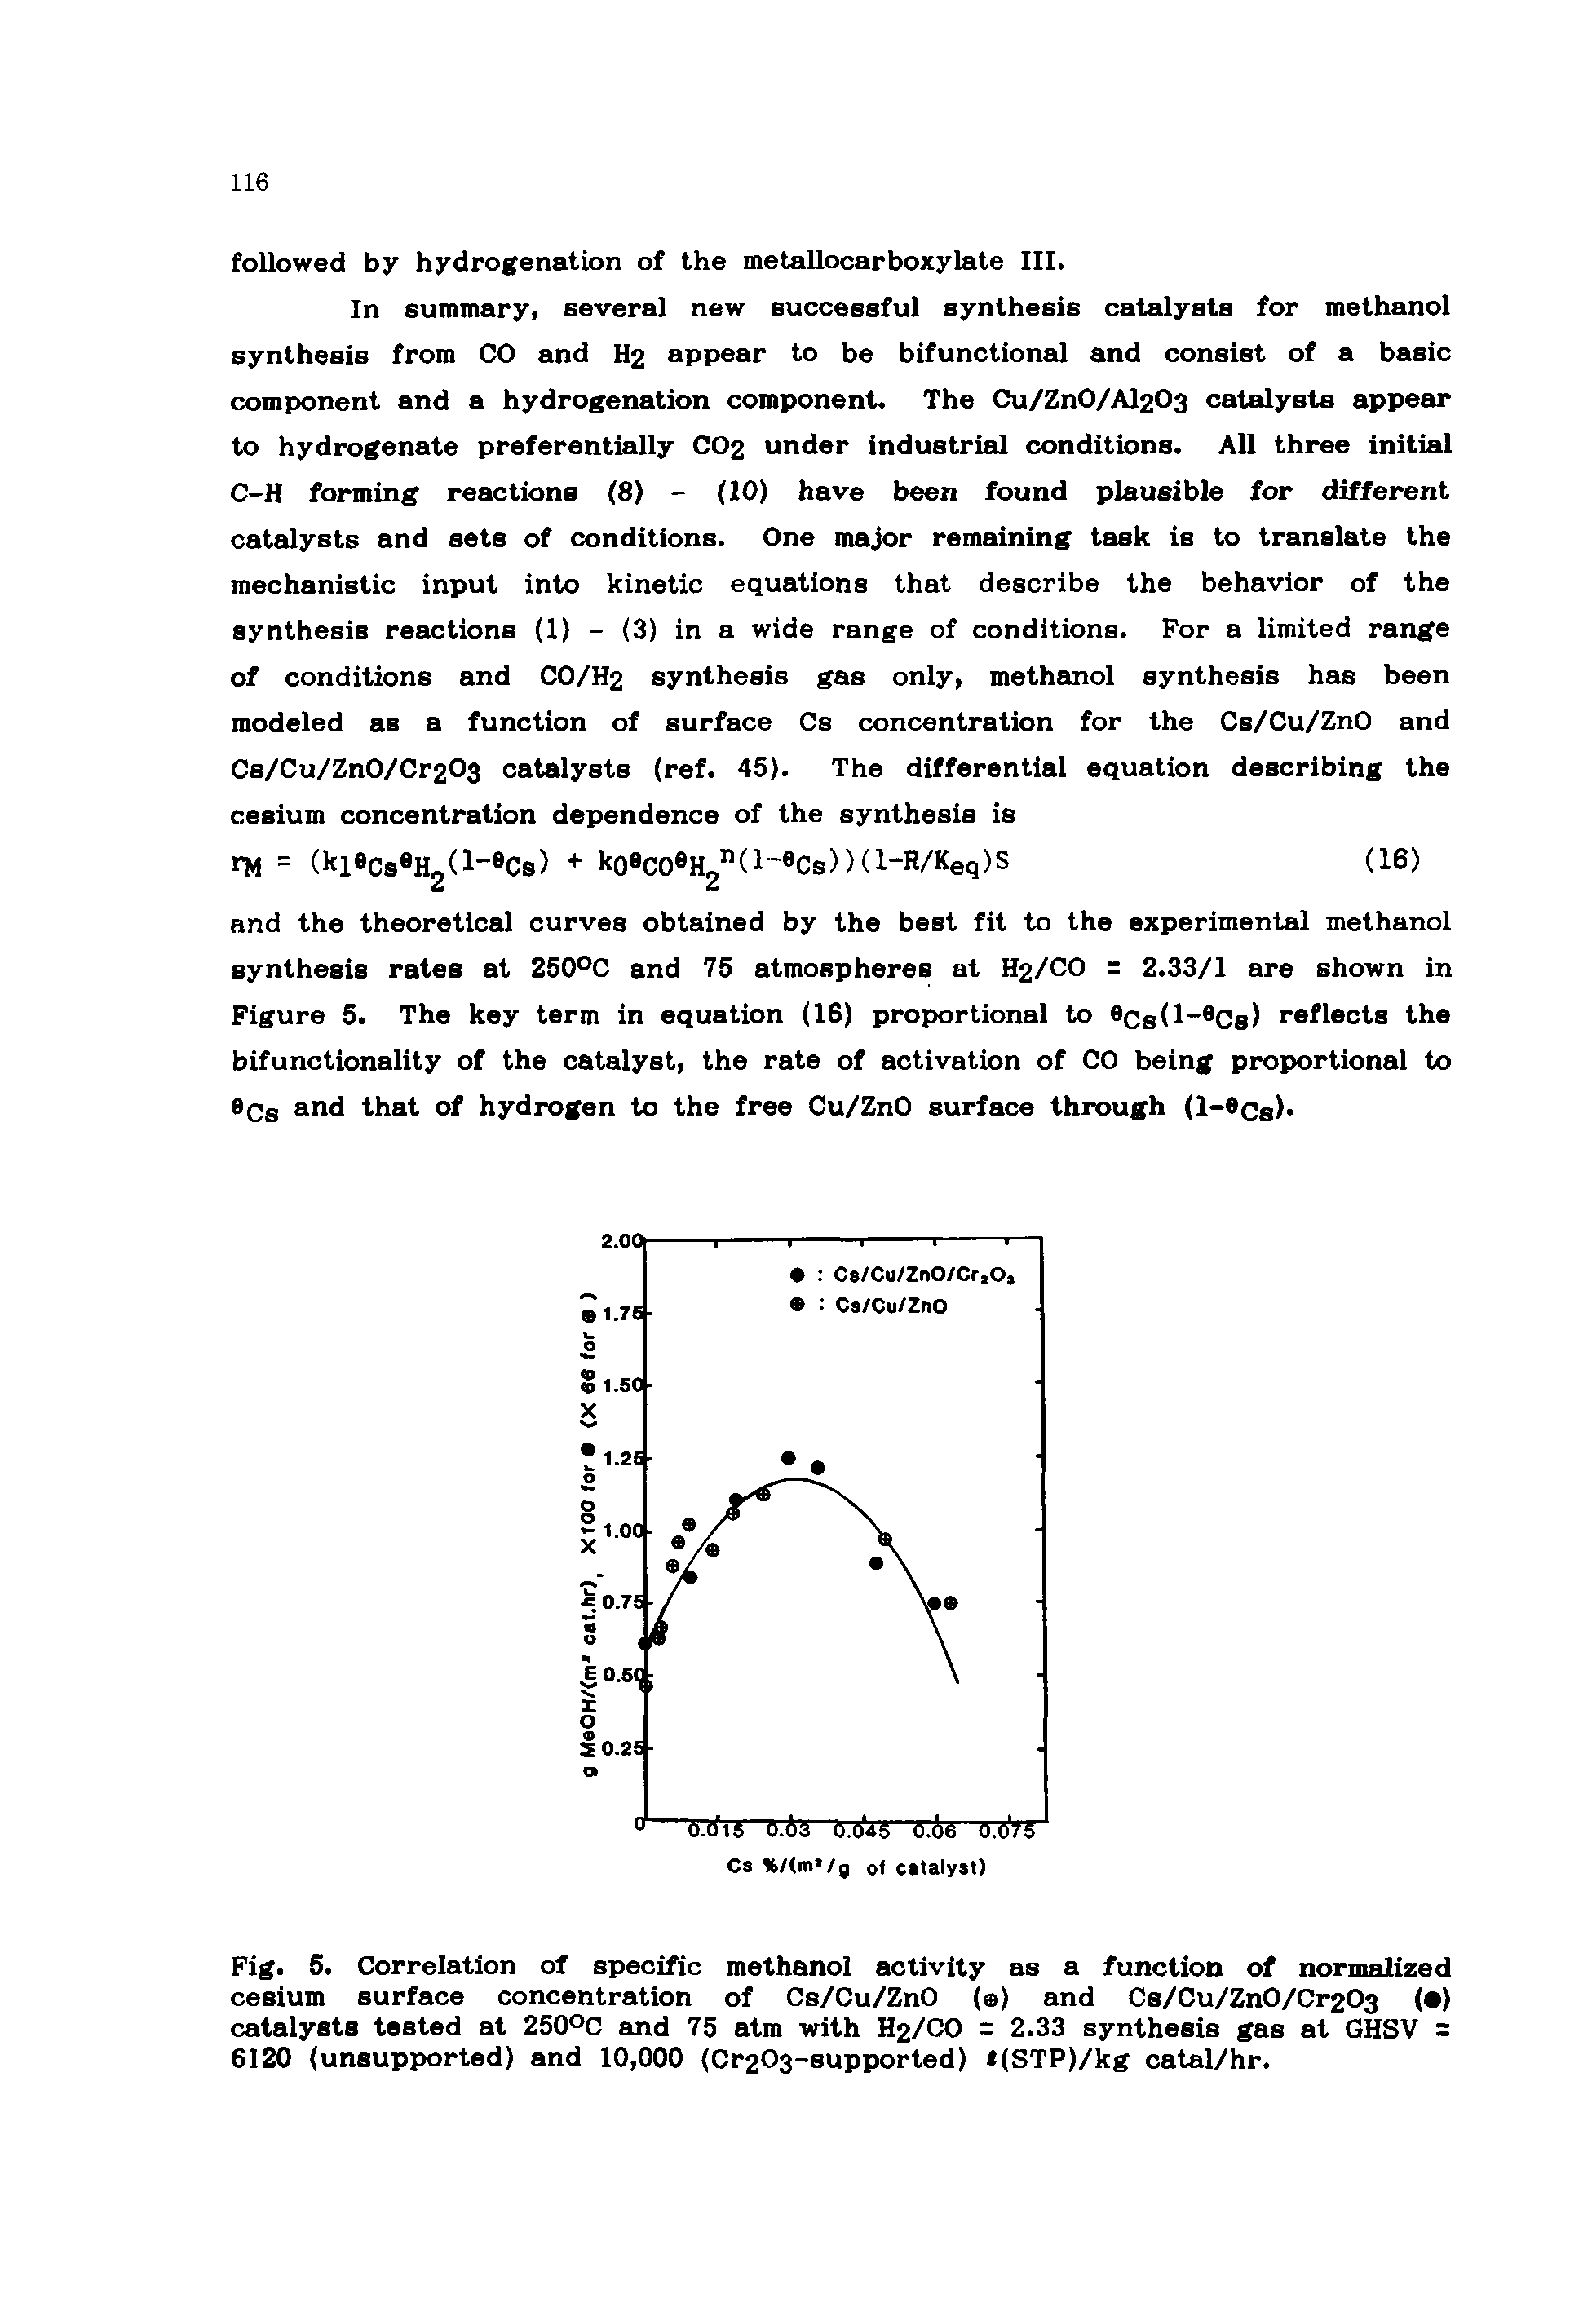 Fig. 5. Correlation of specific methanol activity as a function of normalized cesium surface concentration of Cs/Cu/ZnO (a) and Cs/Cu/Zn0/Cr203 ( ) catalysts tested at 250°C and 75 atm with H2/CO = 2.33 synthesis gas at GHSV = 6120 (unsupported) and 10,000 (Cr203 supported) (STP)/kg catal/hr.